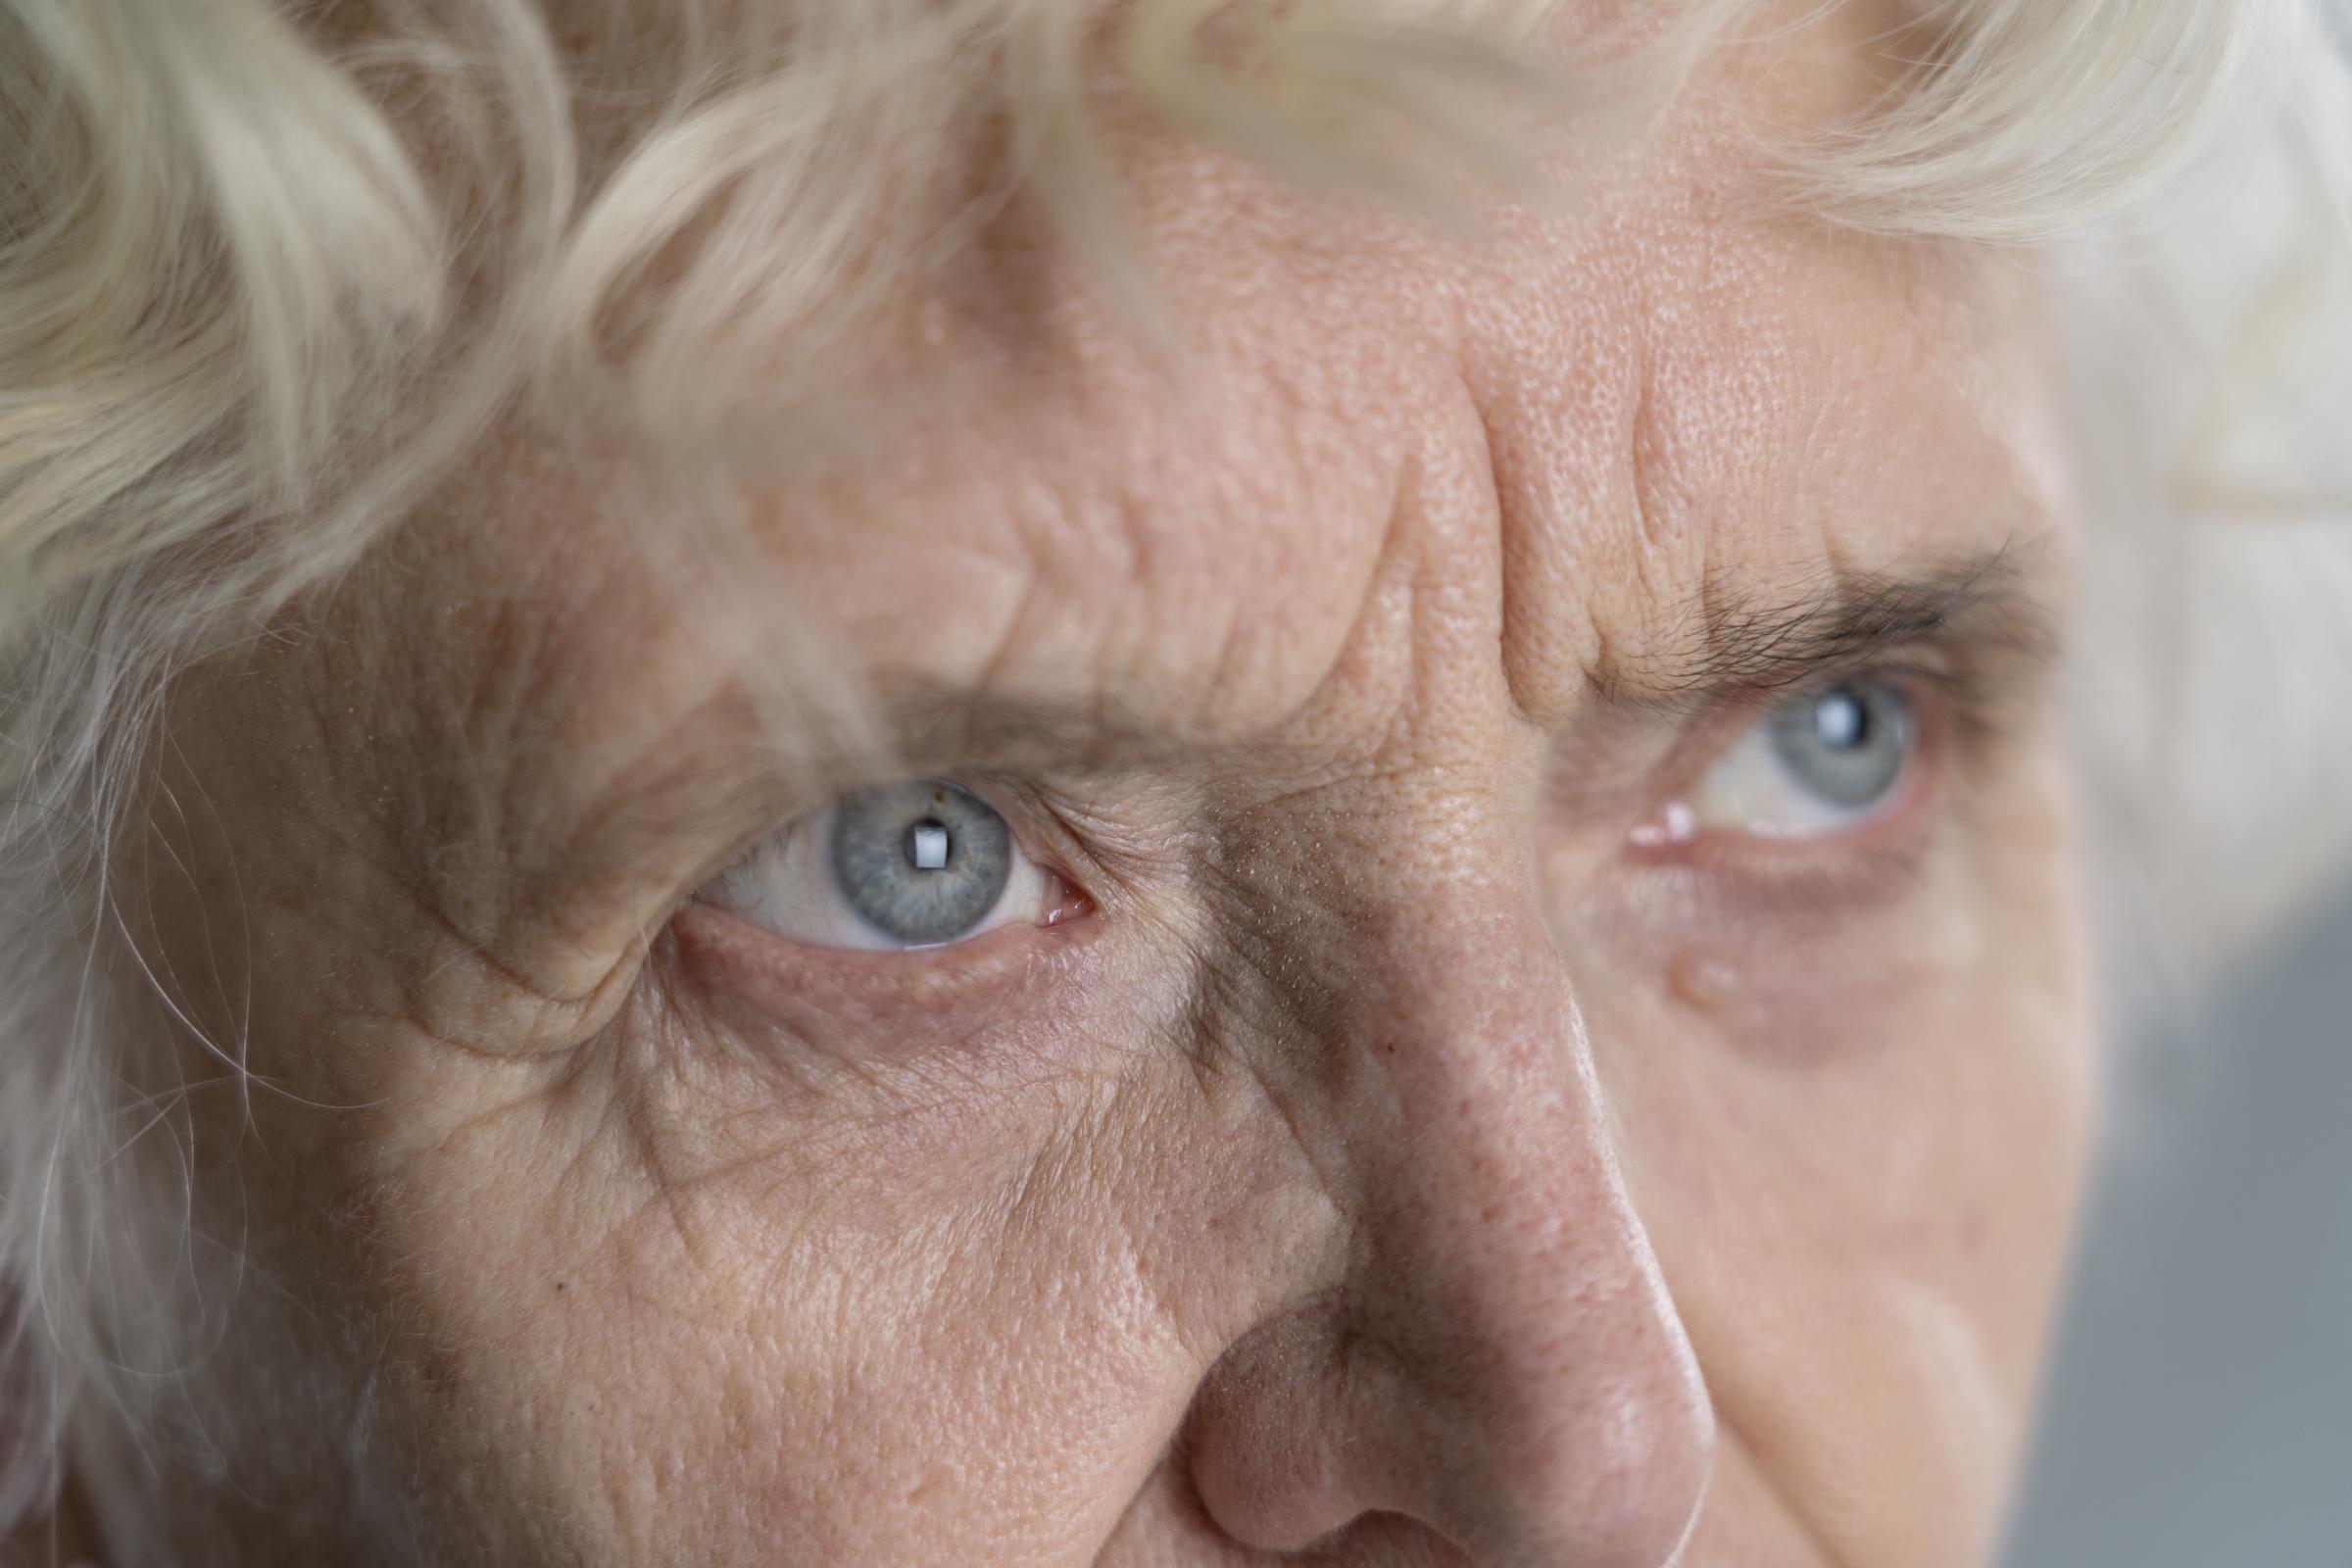 A sad mature woman's eyes filled with understanding and empathy | Source: Freepik